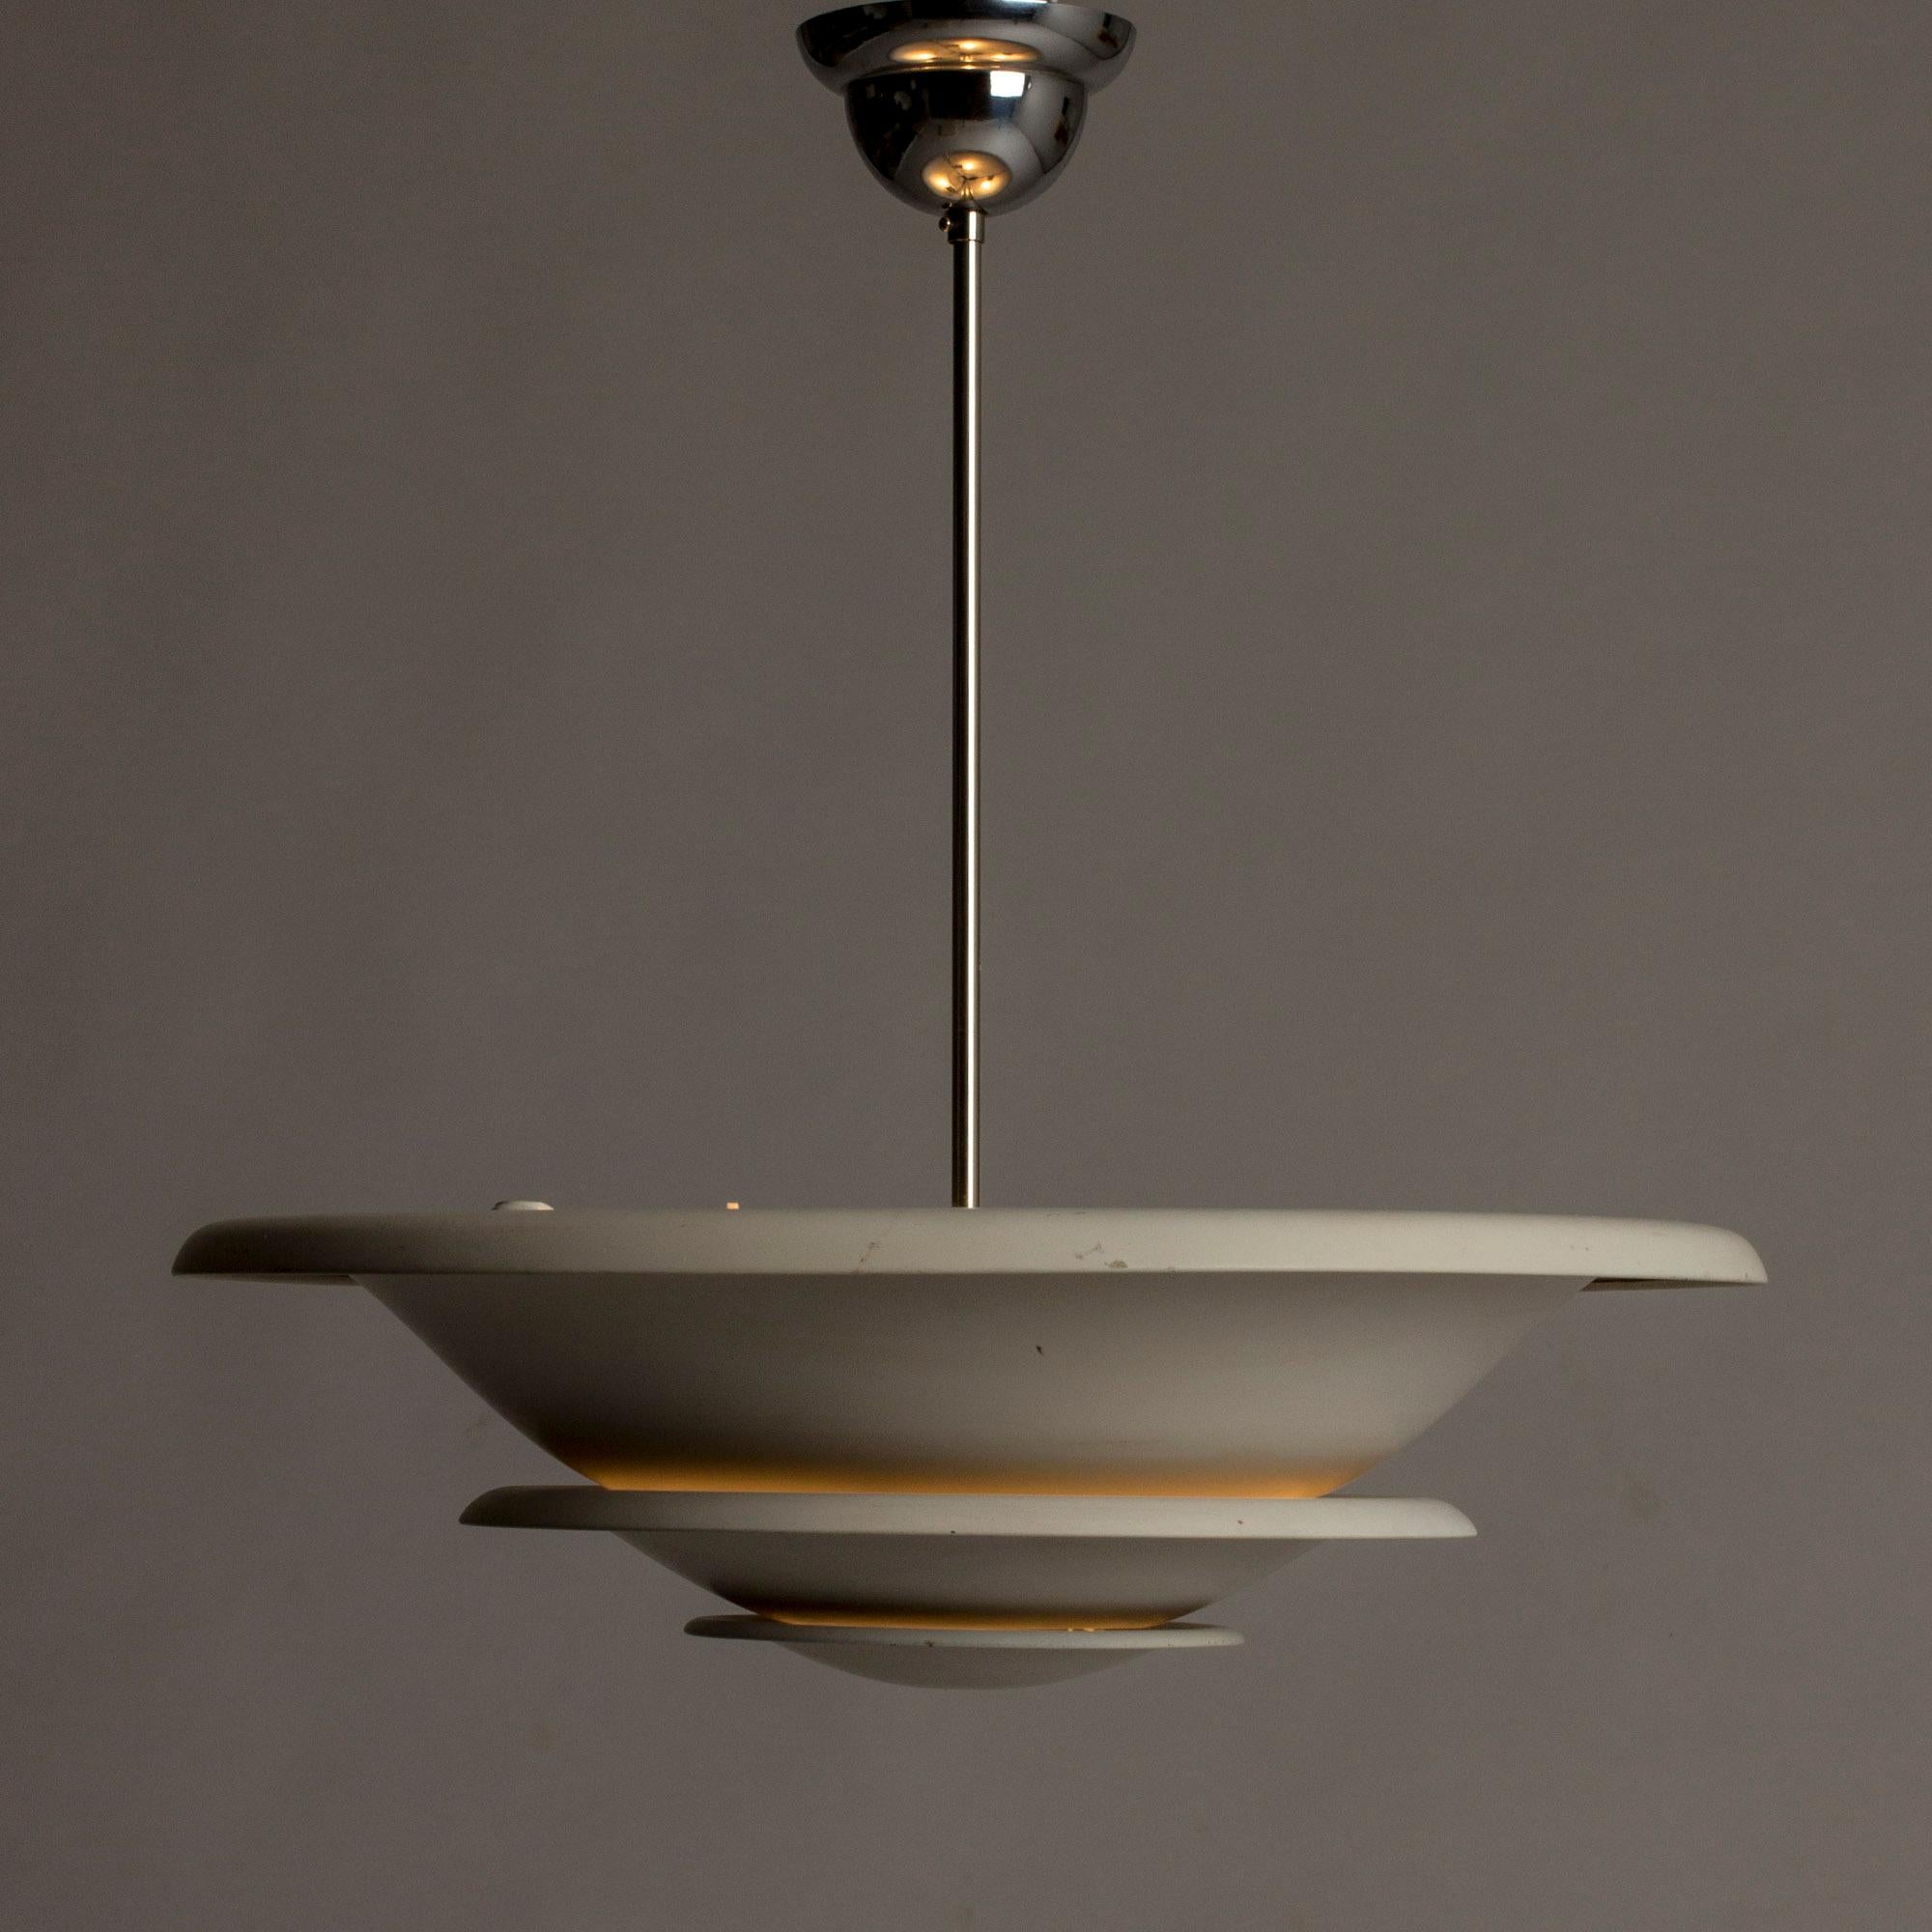 Elegant ceiling lamp from Bröderna Malmström, made in the 1930s. Made in sections that let light out softly between them and towards the ceiling.